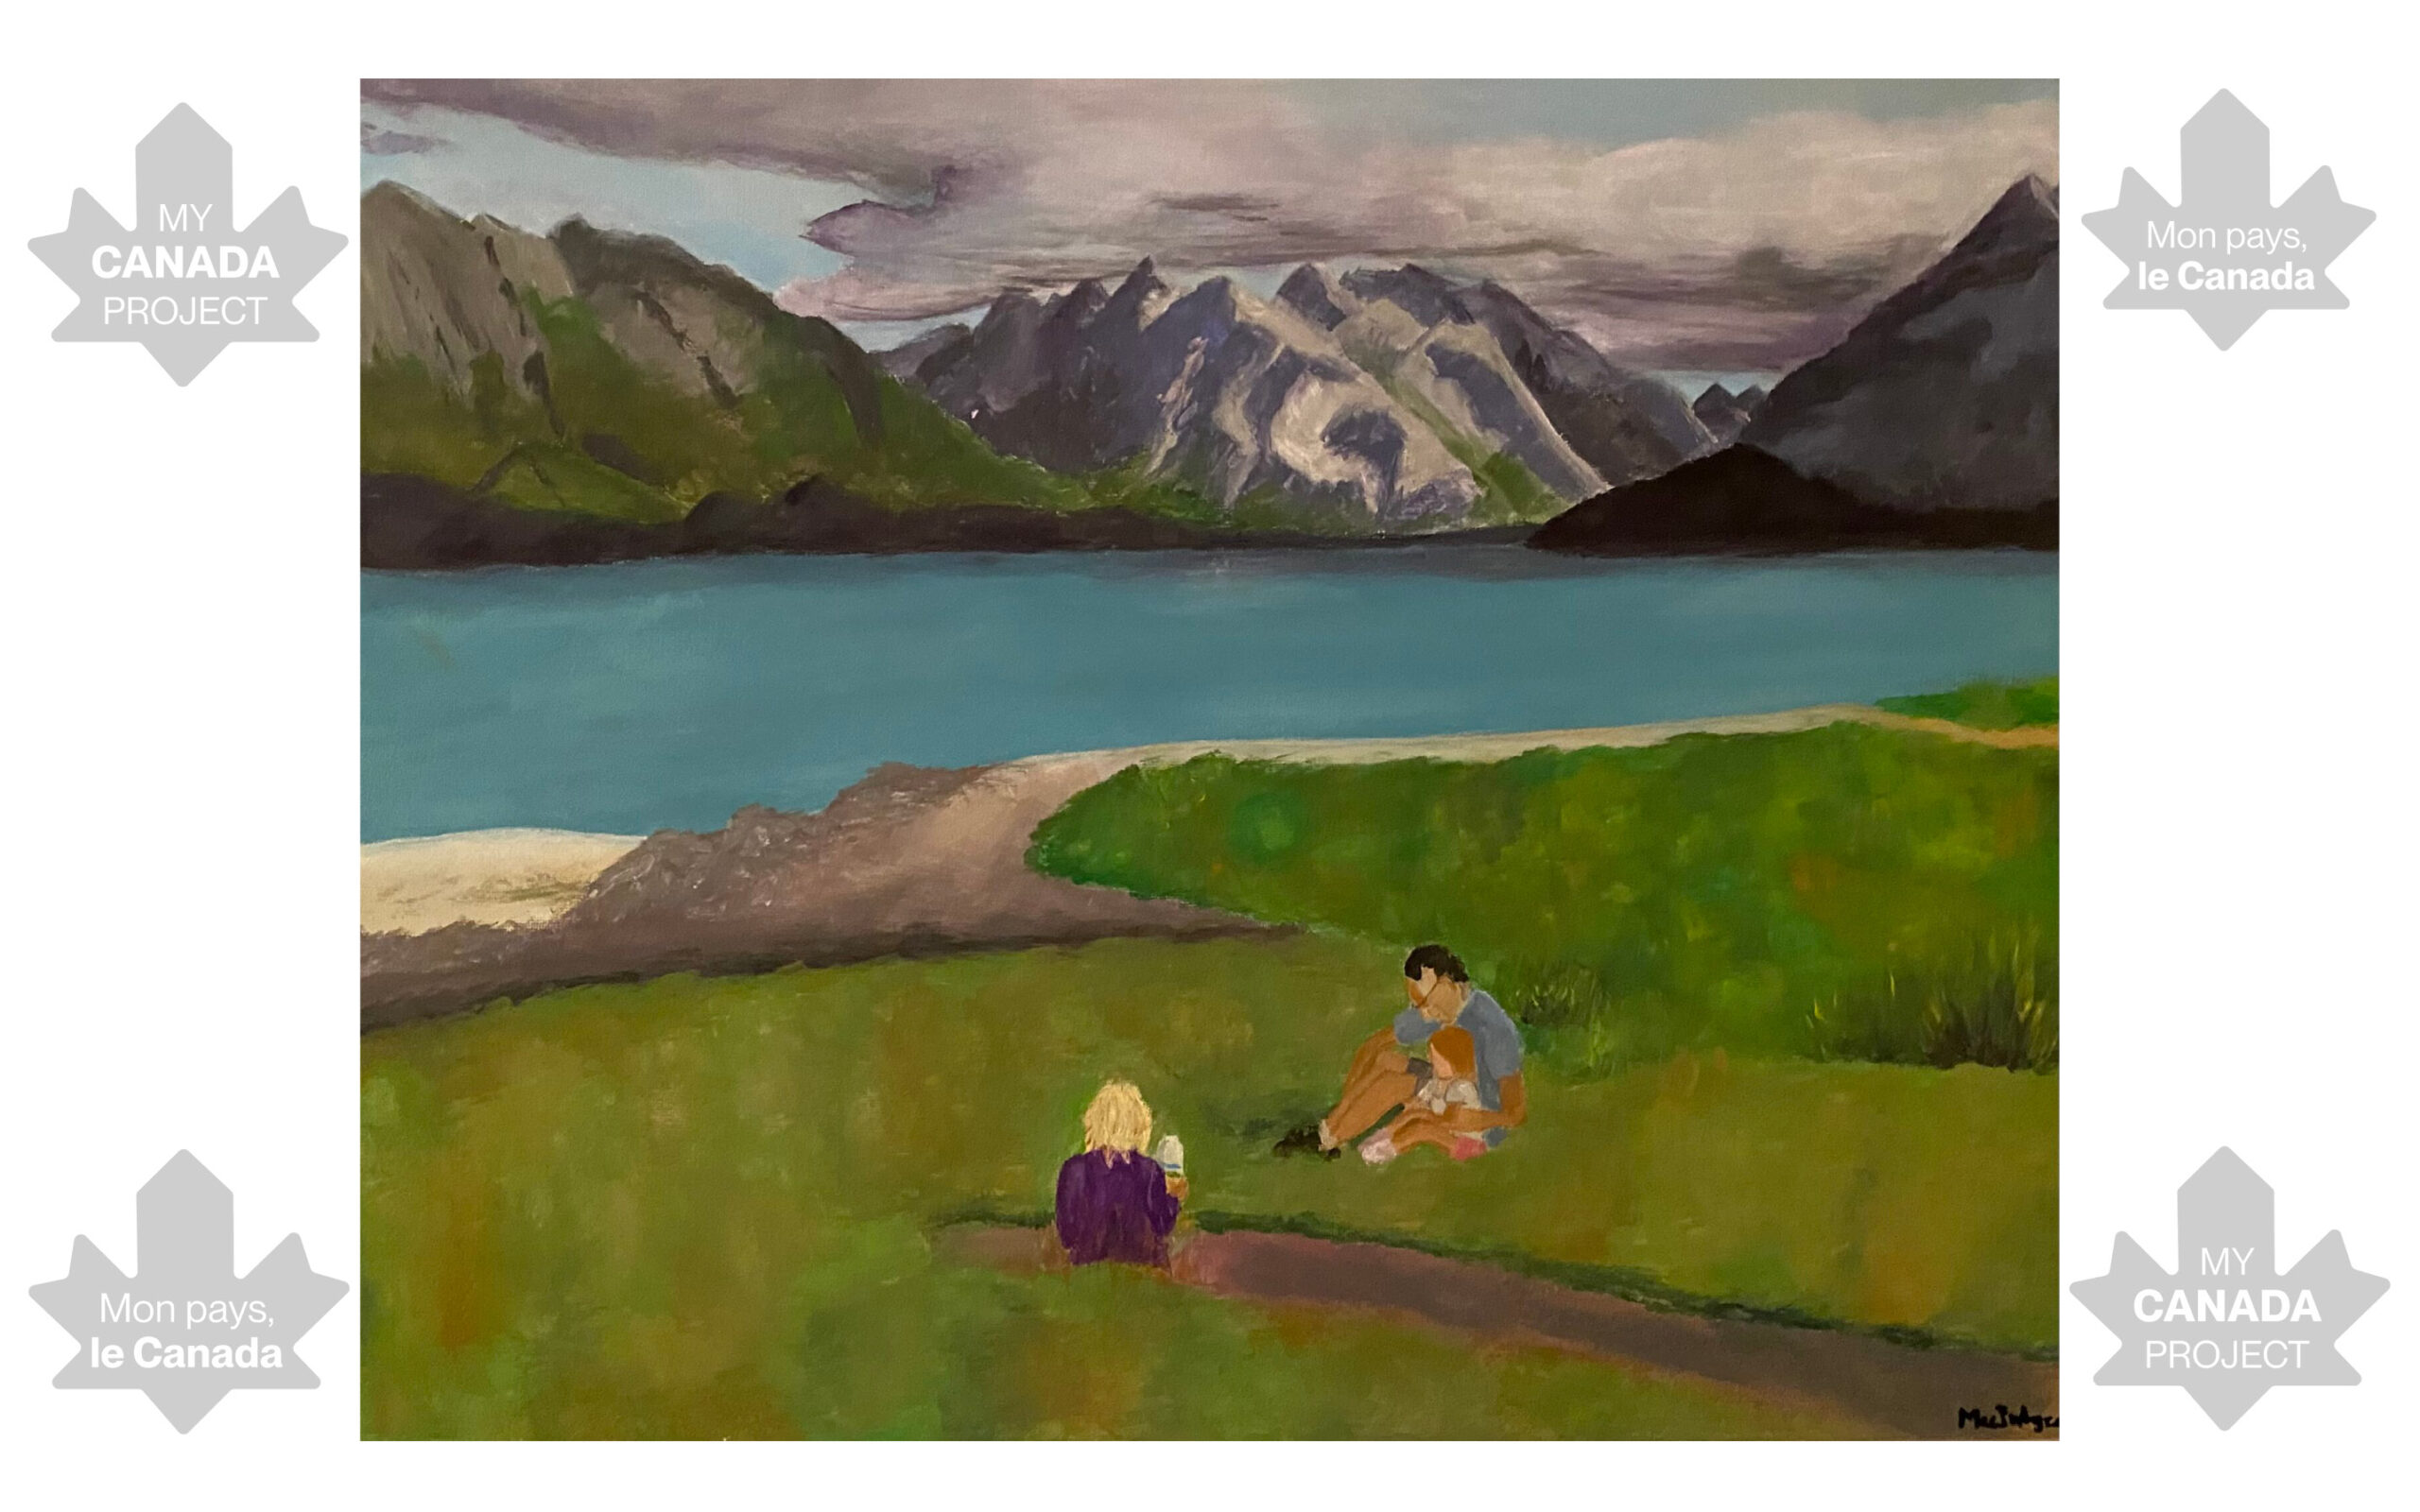 A hand-painted landscape of Jasper, Alberta. In the foreground, the artist and her family are seated in the grass together. The father and daughter are cuddled together. In the midground, a wide blue river crosses the landscape. In the background, large mountains are illuminated on one side by the sun, the other side is cast in shadows. There is greenery visible on the mountainsides.